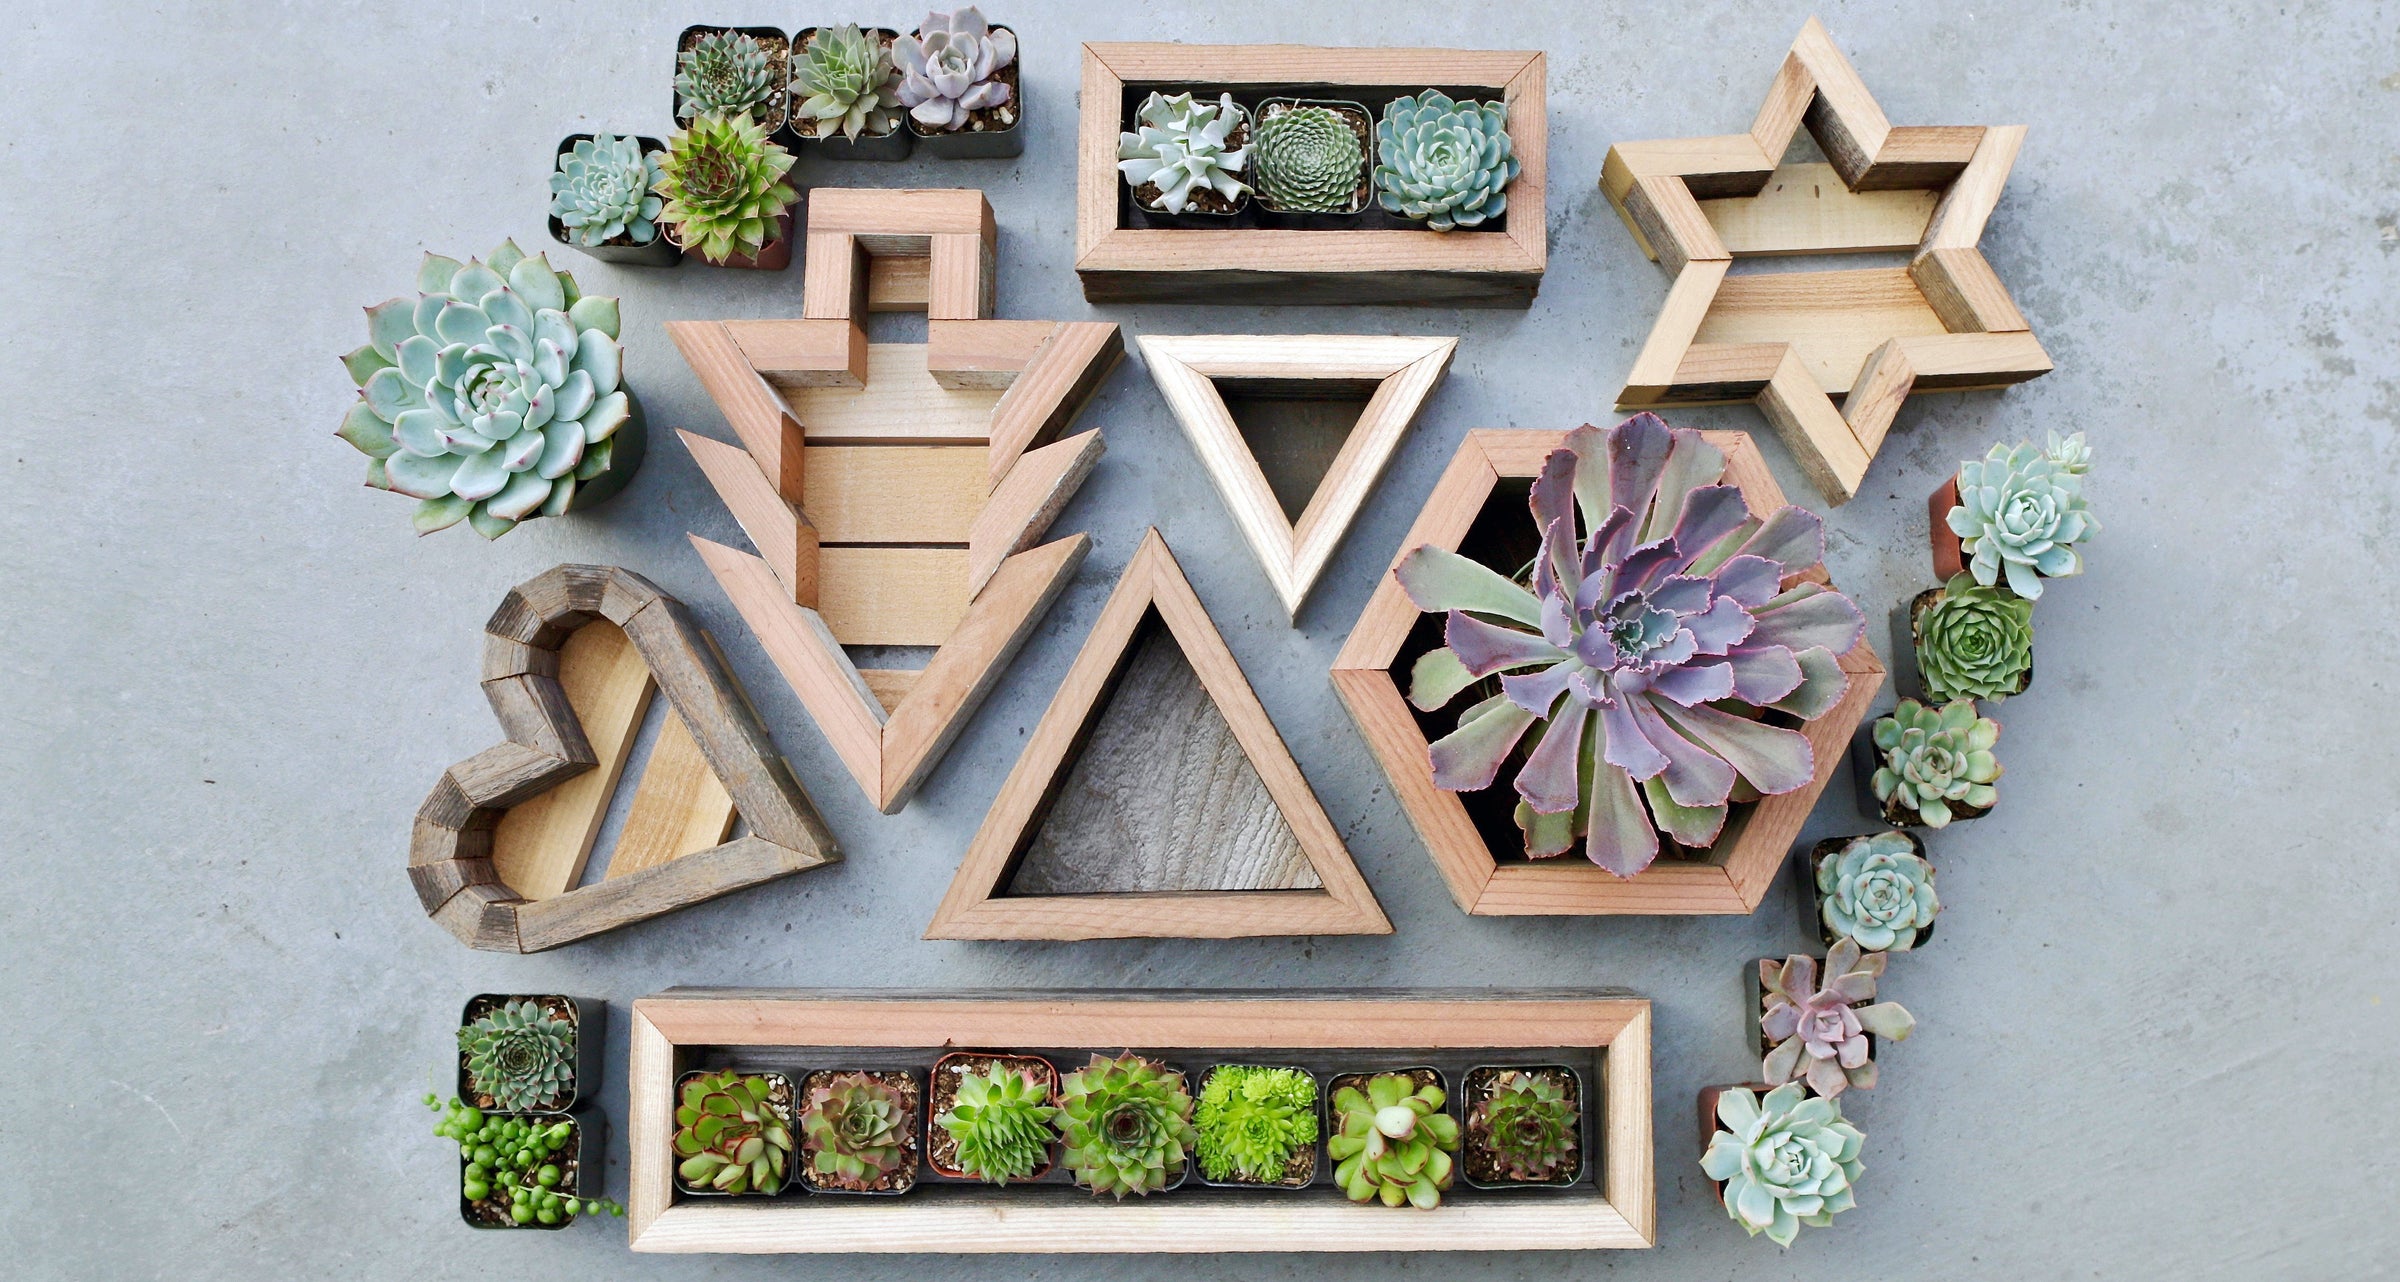 Succulent Grow Kits & Accessories